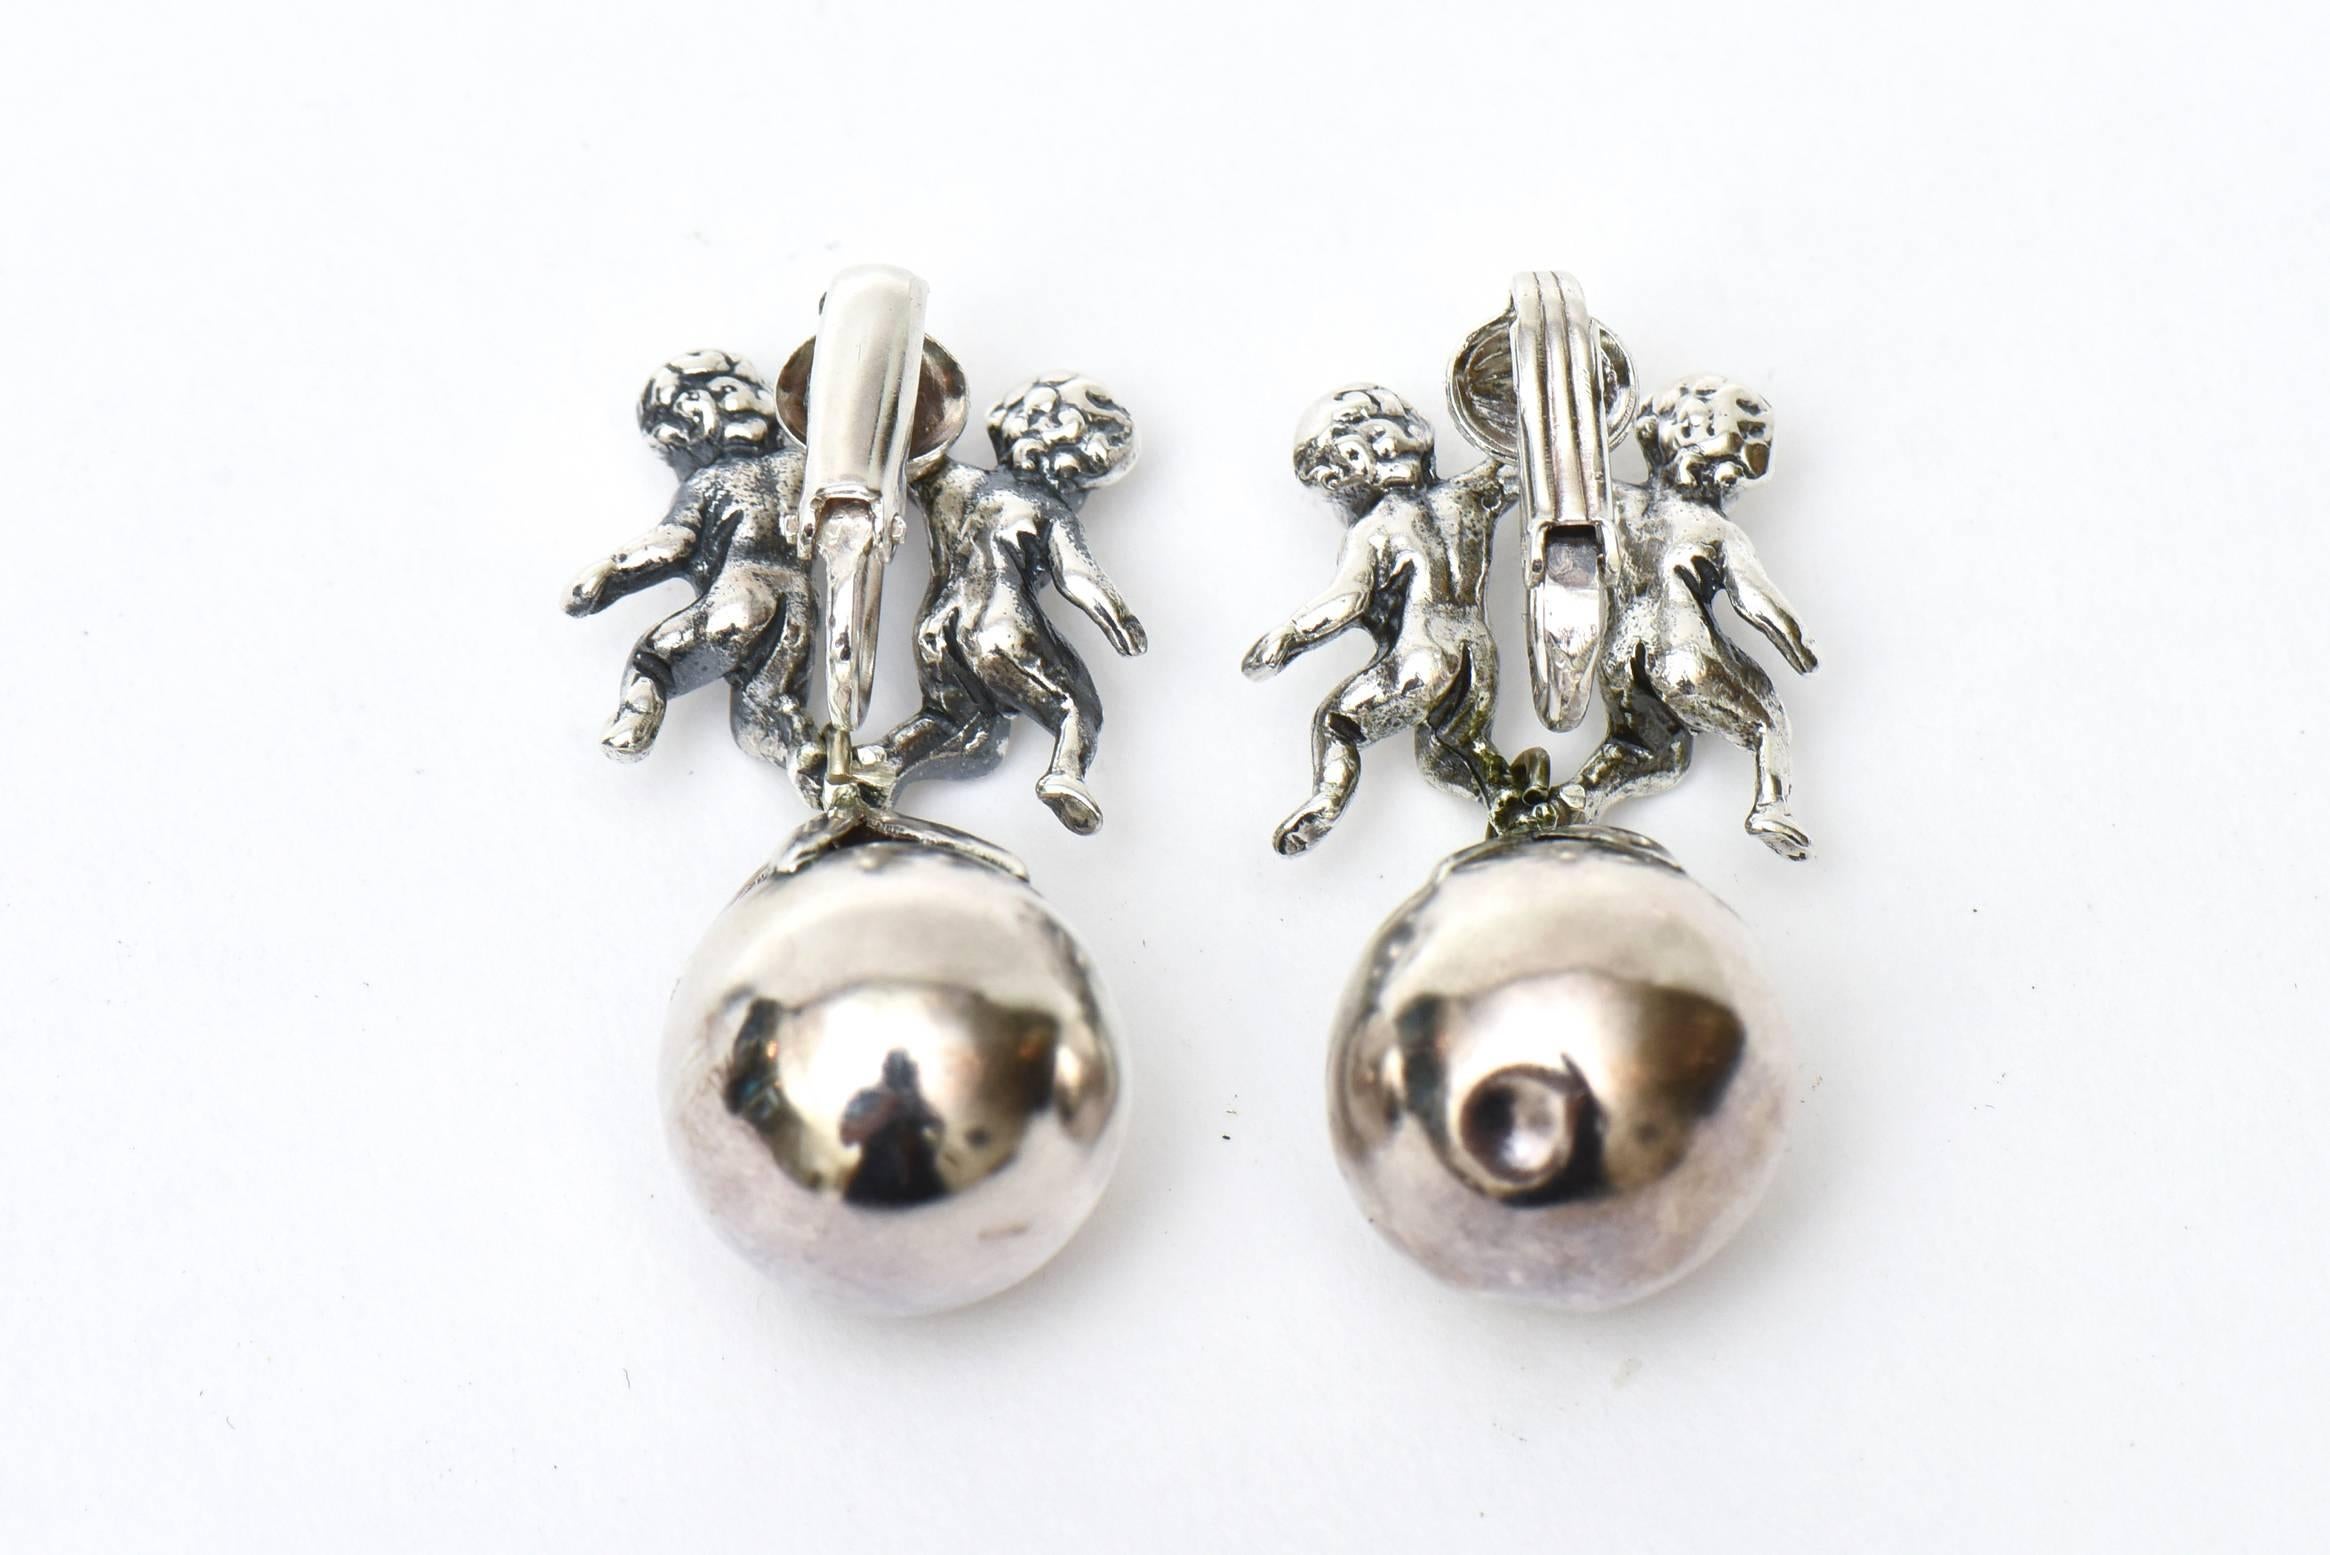 These beautiful and unusual pair of Italian sterling silver vintage mid century modern dangle drop clip on earrings are signed Cini sterling. They are wonderful on the ear  lobe. They can be dressed up or down; day to evening wear. They are from the